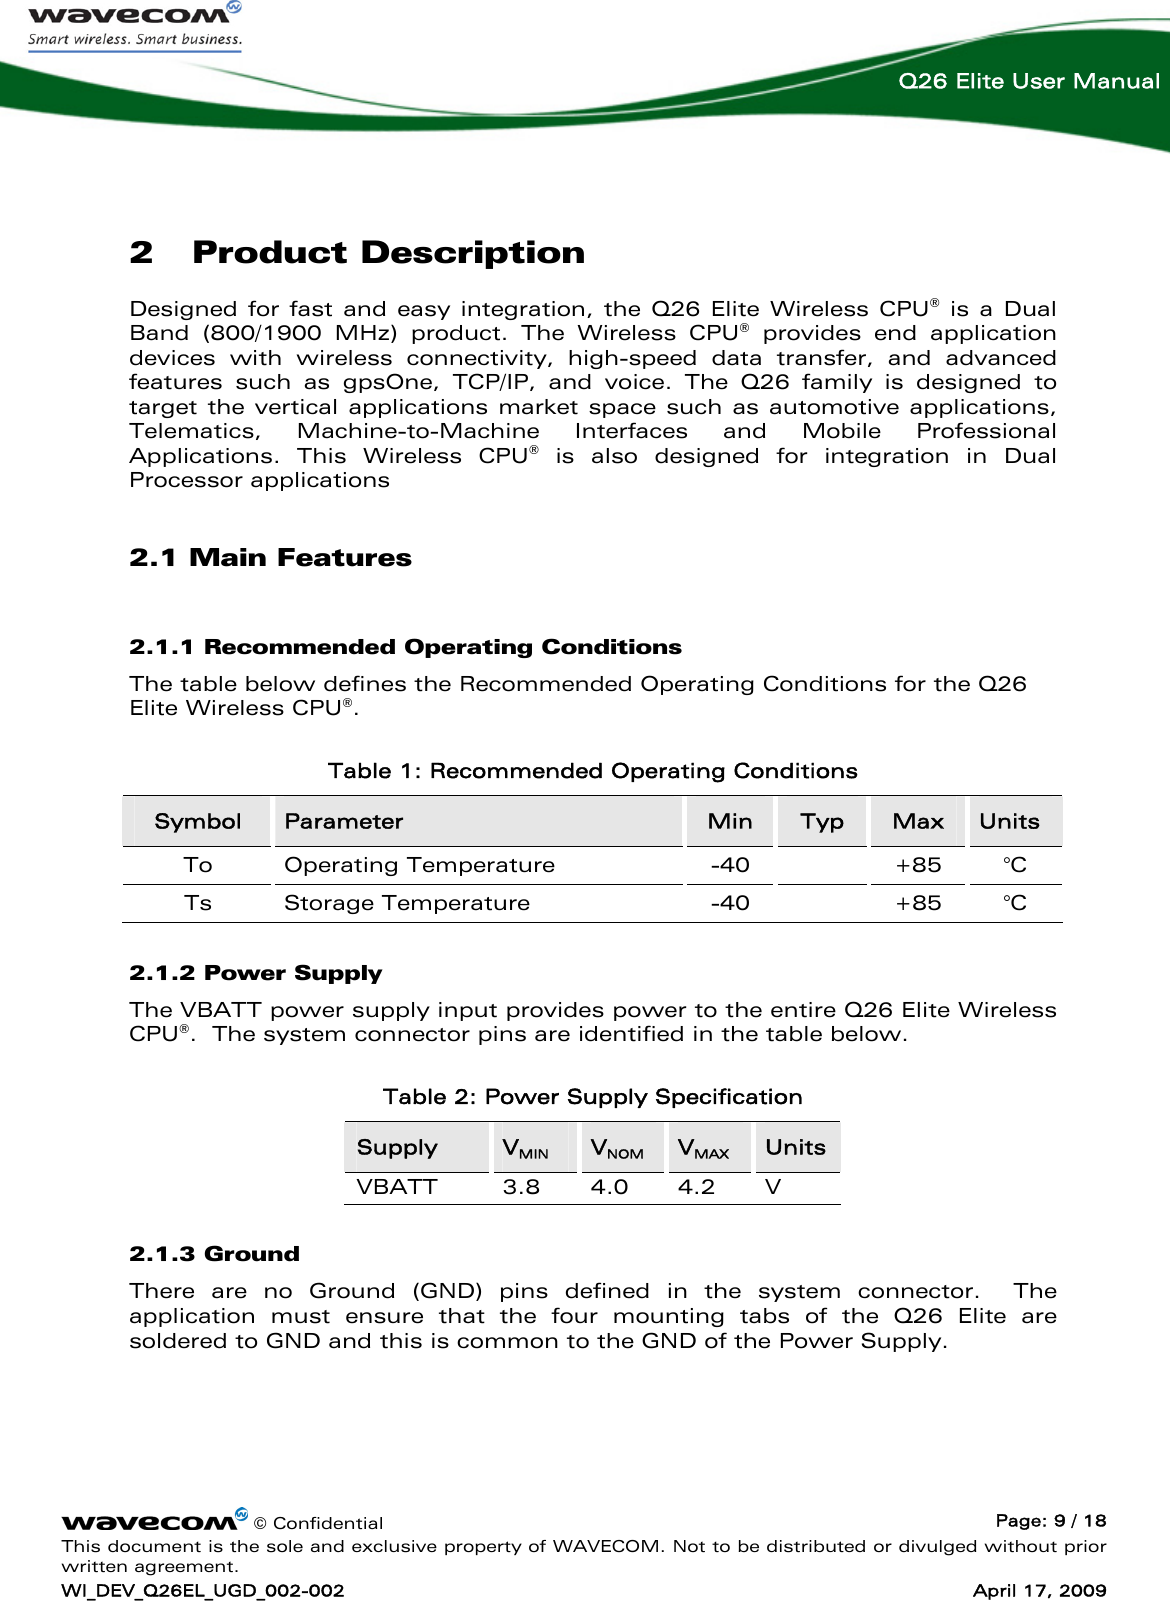    © Confidential  Page: 9 / 18 This document is the sole and exclusive property of WAVECOM. Not to be distributed or divulged without prior written agreement. WI_DEV_Q26EL_UGD_002-002  April 17, 2009  Q26 Elite User Manual 2 Product Description Designed for fast and easy integration, the Q26 Elite Wireless CPU® is a Dual Band (800/1900 MHz) product. The Wireless CPU® provides end application devices with wireless connectivity, high-speed data transfer, and advanced features such as gpsOne, TCP/IP, and voice. The Q26 family is designed to target the vertical applications market space such as automotive applications, Telematics, Machine-to-Machine Interfaces and Mobile Professional Applications. This Wireless CPU® is also designed for integration in Dual Processor applications  2.1 Main Features 2.1.1 Recommended Operating Conditions The table below defines the Recommended Operating Conditions for the Q26 Elite Wireless CPU®. Table 1: Recommended Operating Conditions Symbol  Parameter  Min  Typ  Max  Units To Operating Temperature  -40  +85 °C Ts Storage Temperature  -40  +85 °C 2.1.2 Power Supply The VBATT power supply input provides power to the entire Q26 Elite Wireless CPU®.  The system connector pins are identified in the table below. Table 2: Power Supply Specification Supply  VMIN VNOM VMAX Units VBATT 3.8 4.0 4.2 V 2.1.3 Ground There are no Ground (GND) pins defined in the system connector.  The application must ensure that the four mounting tabs of the Q26 Elite are soldered to GND and this is common to the GND of the Power Supply.  